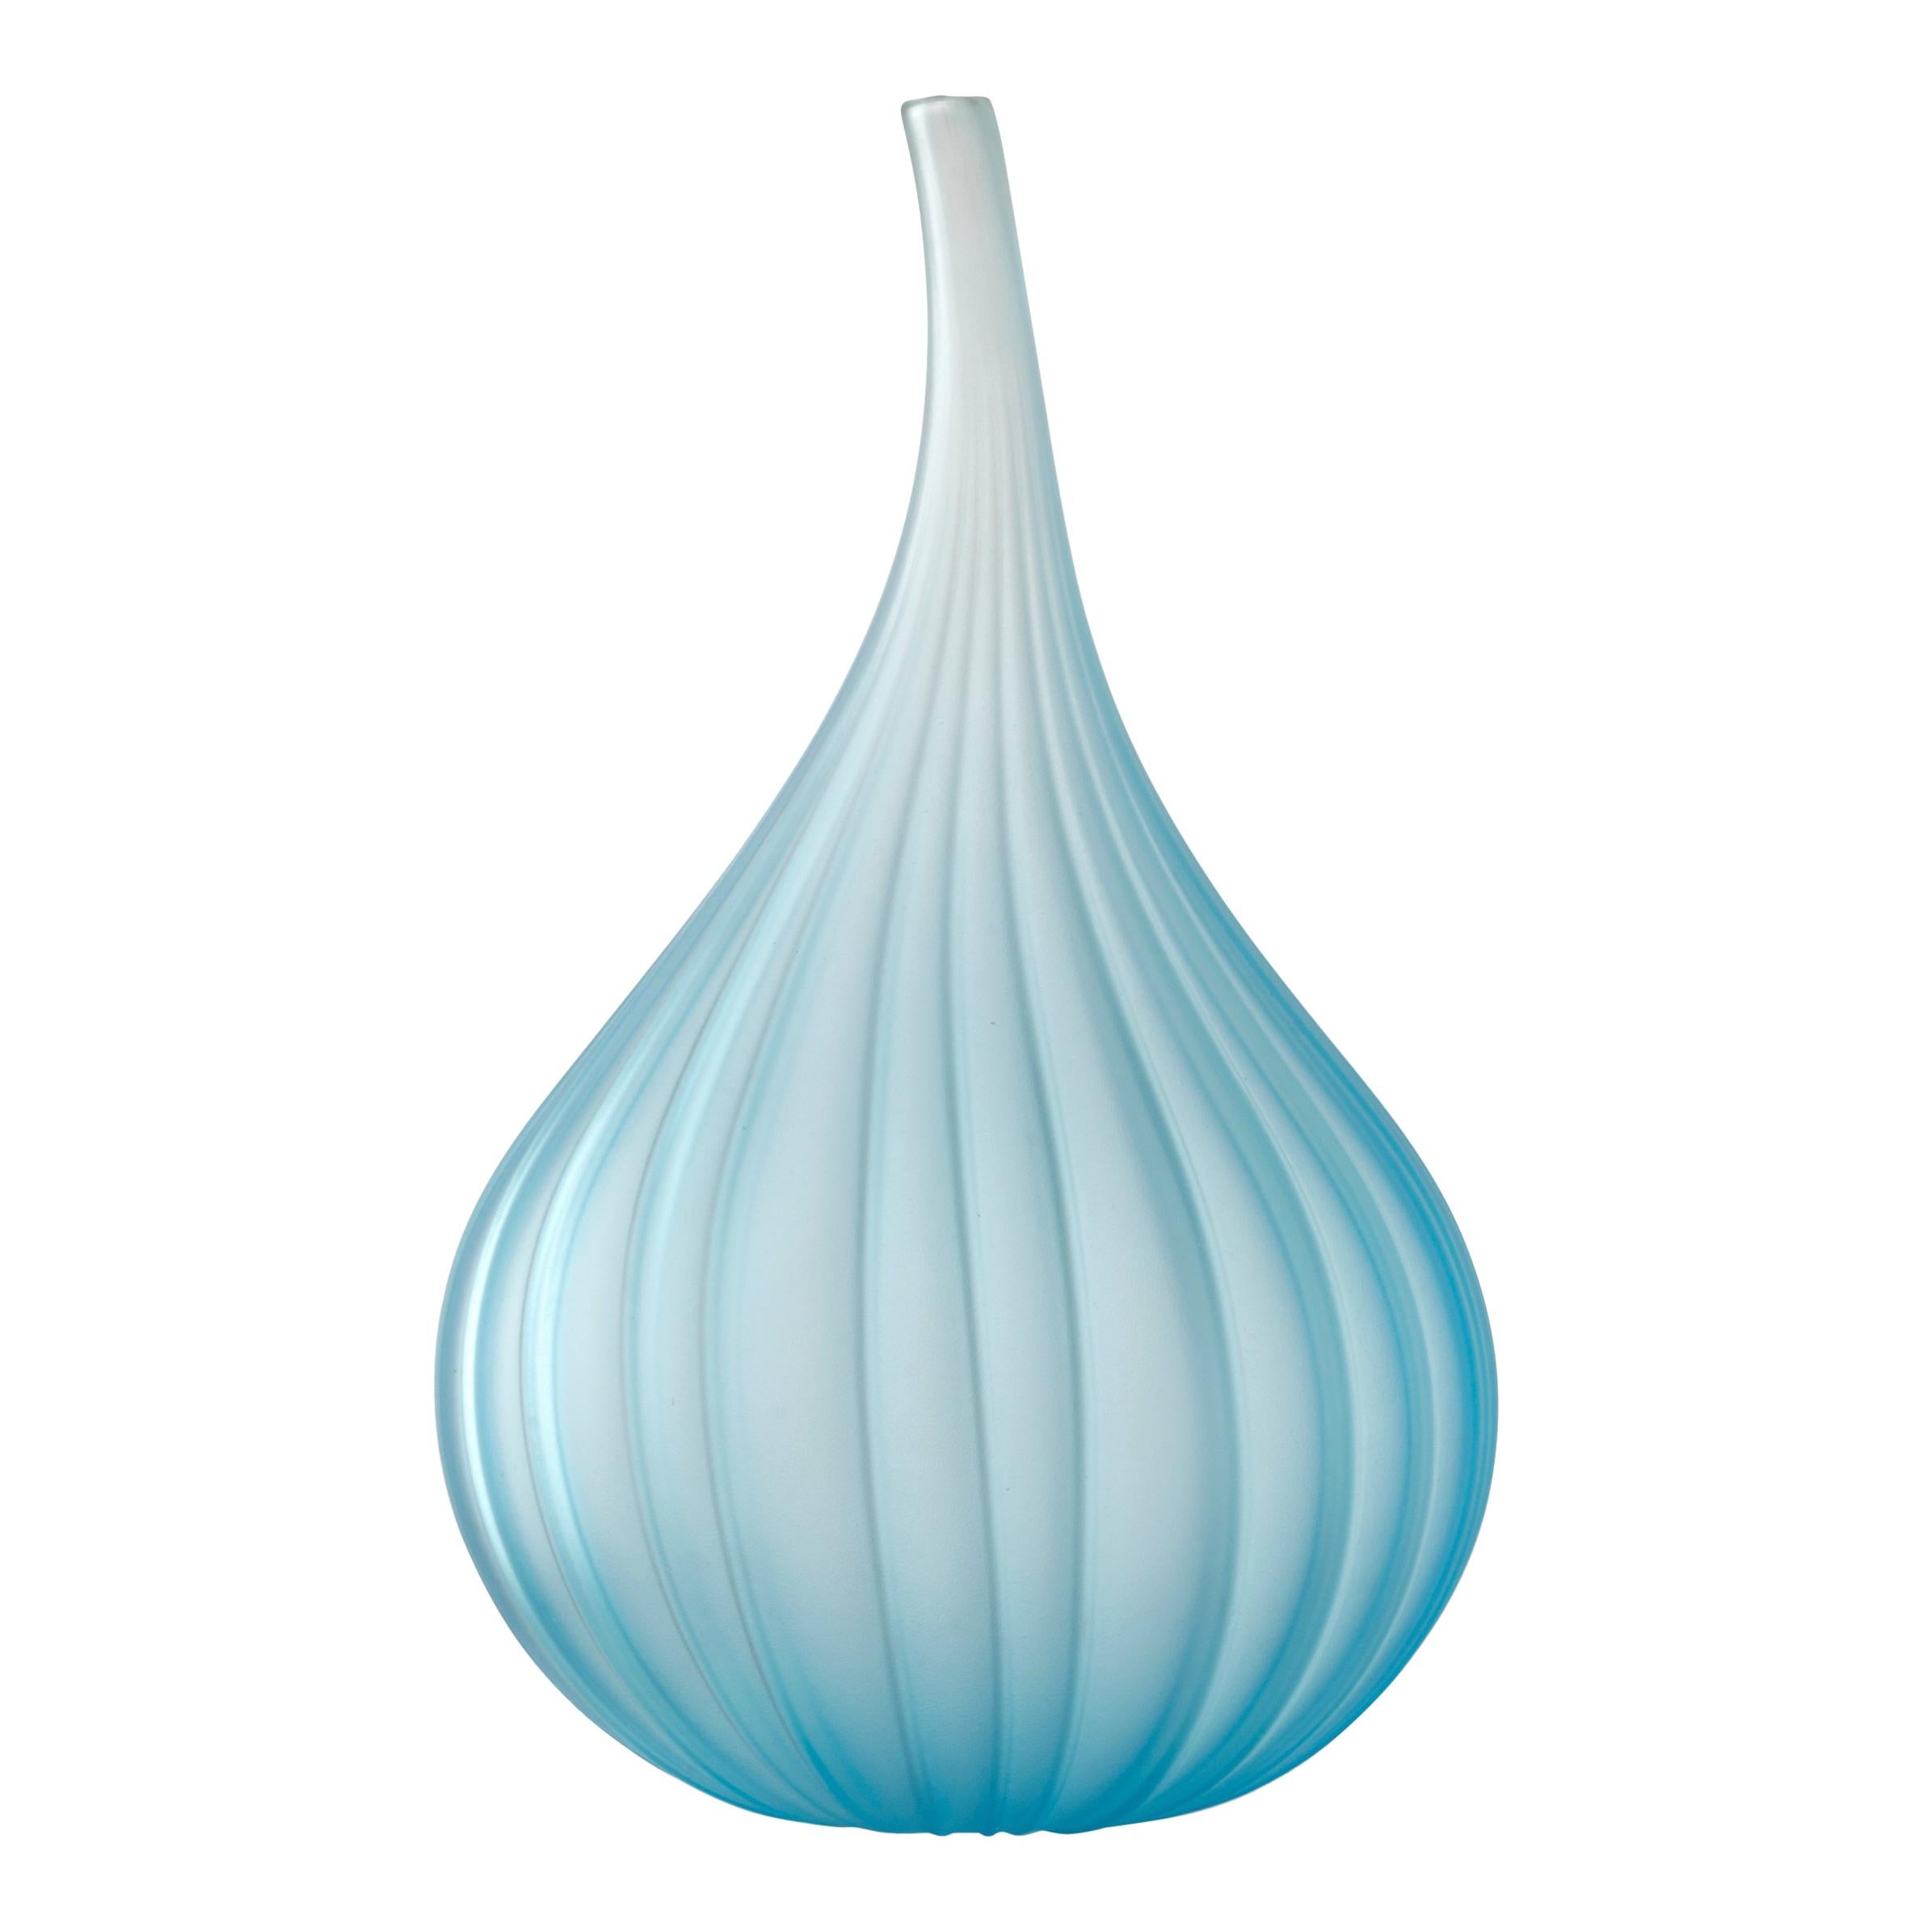 Salviati Drops Vase in Satin Teal Glass by Renzo Stellon For Sale